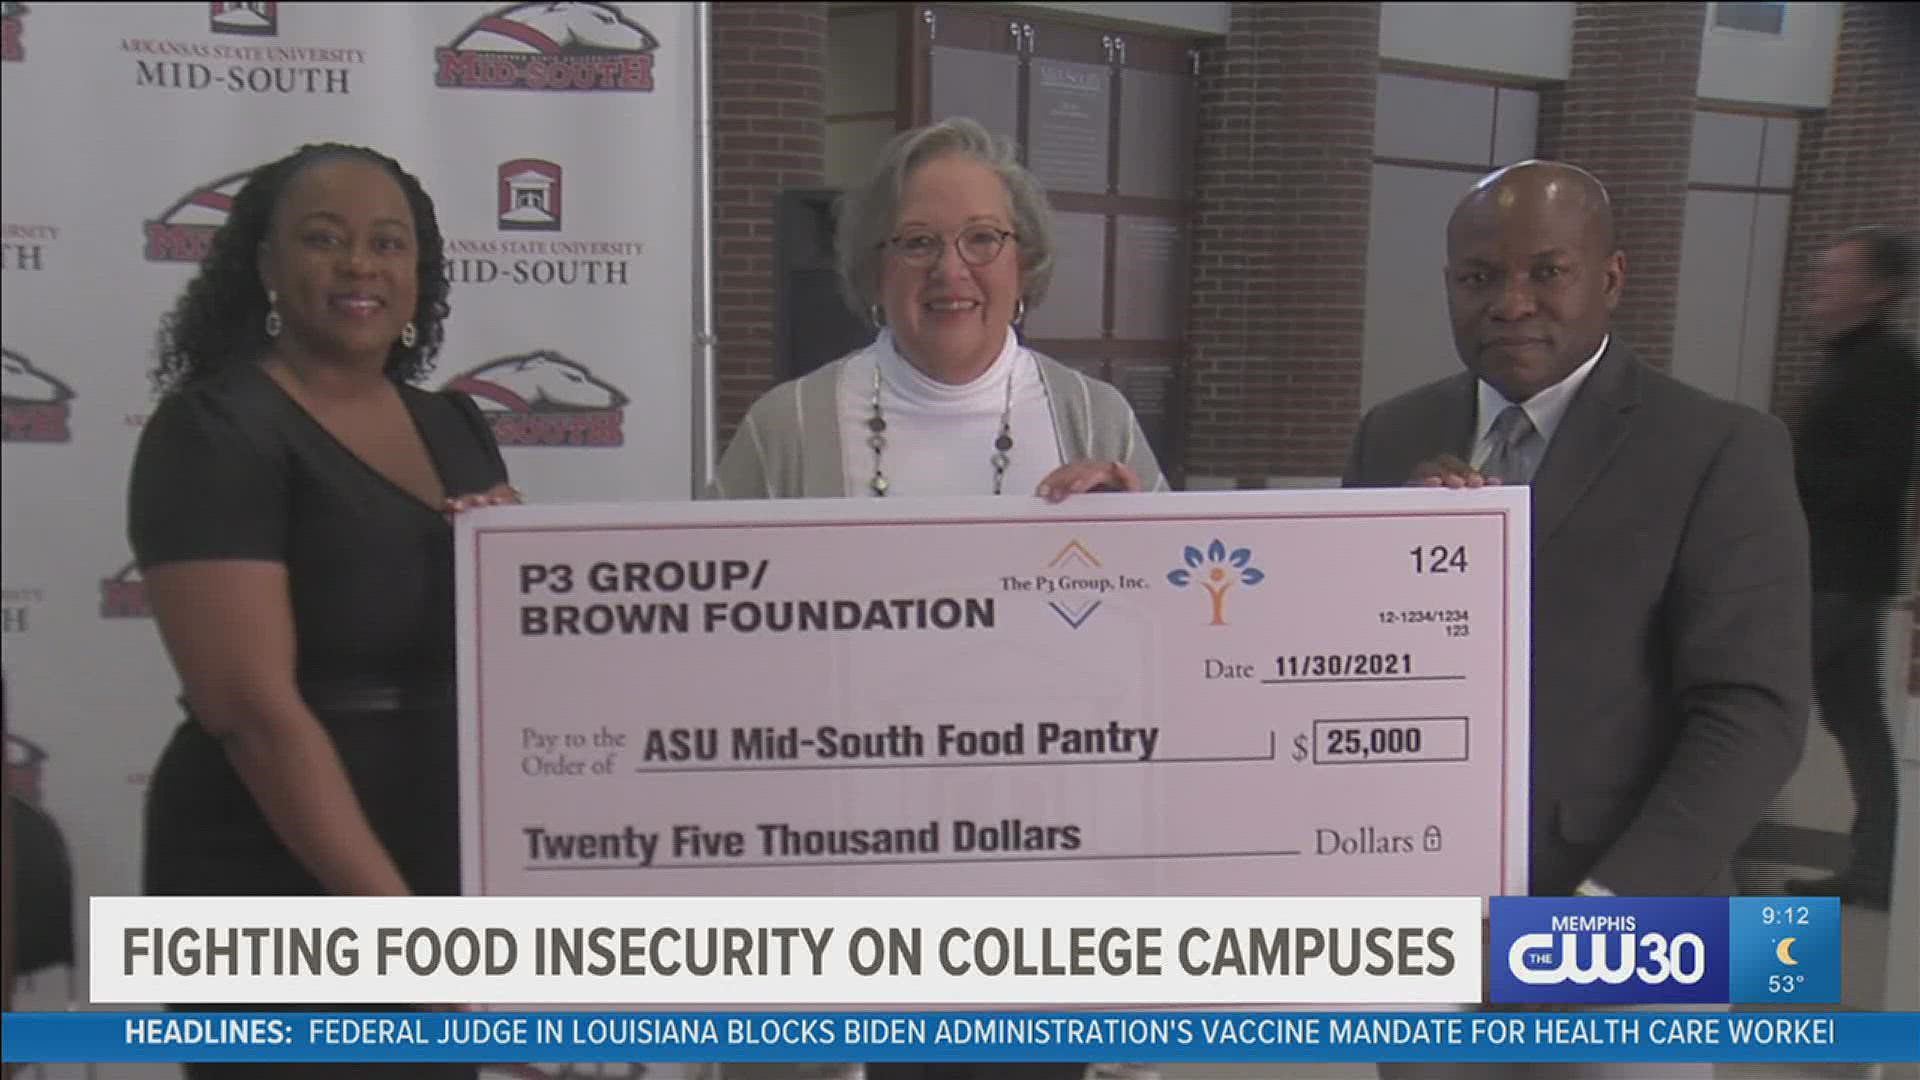 ASU officials say that many students on campus do not have consistent access to food and will often go hungry.